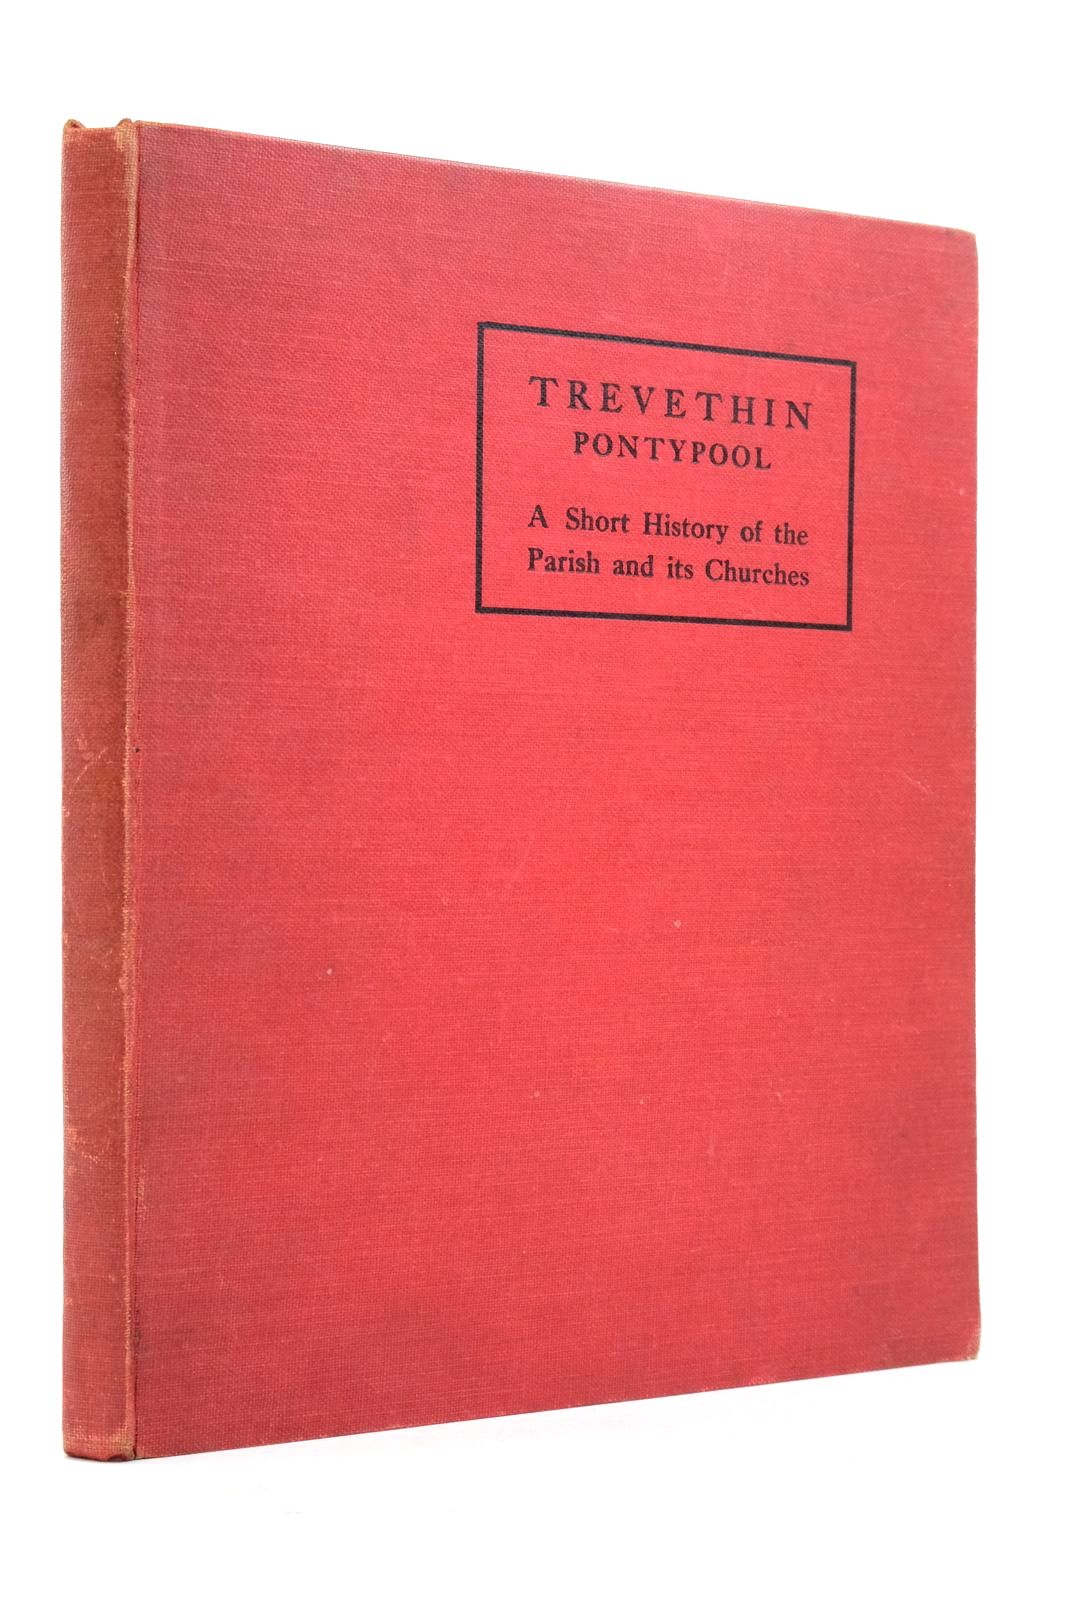 Photo of TREVETHIN PONTYPOOL written by Rees, Vaughan W.T. published by Hughes and Son Ltd., Griffin Press (STOCK CODE: 2137878)  for sale by Stella & Rose's Books